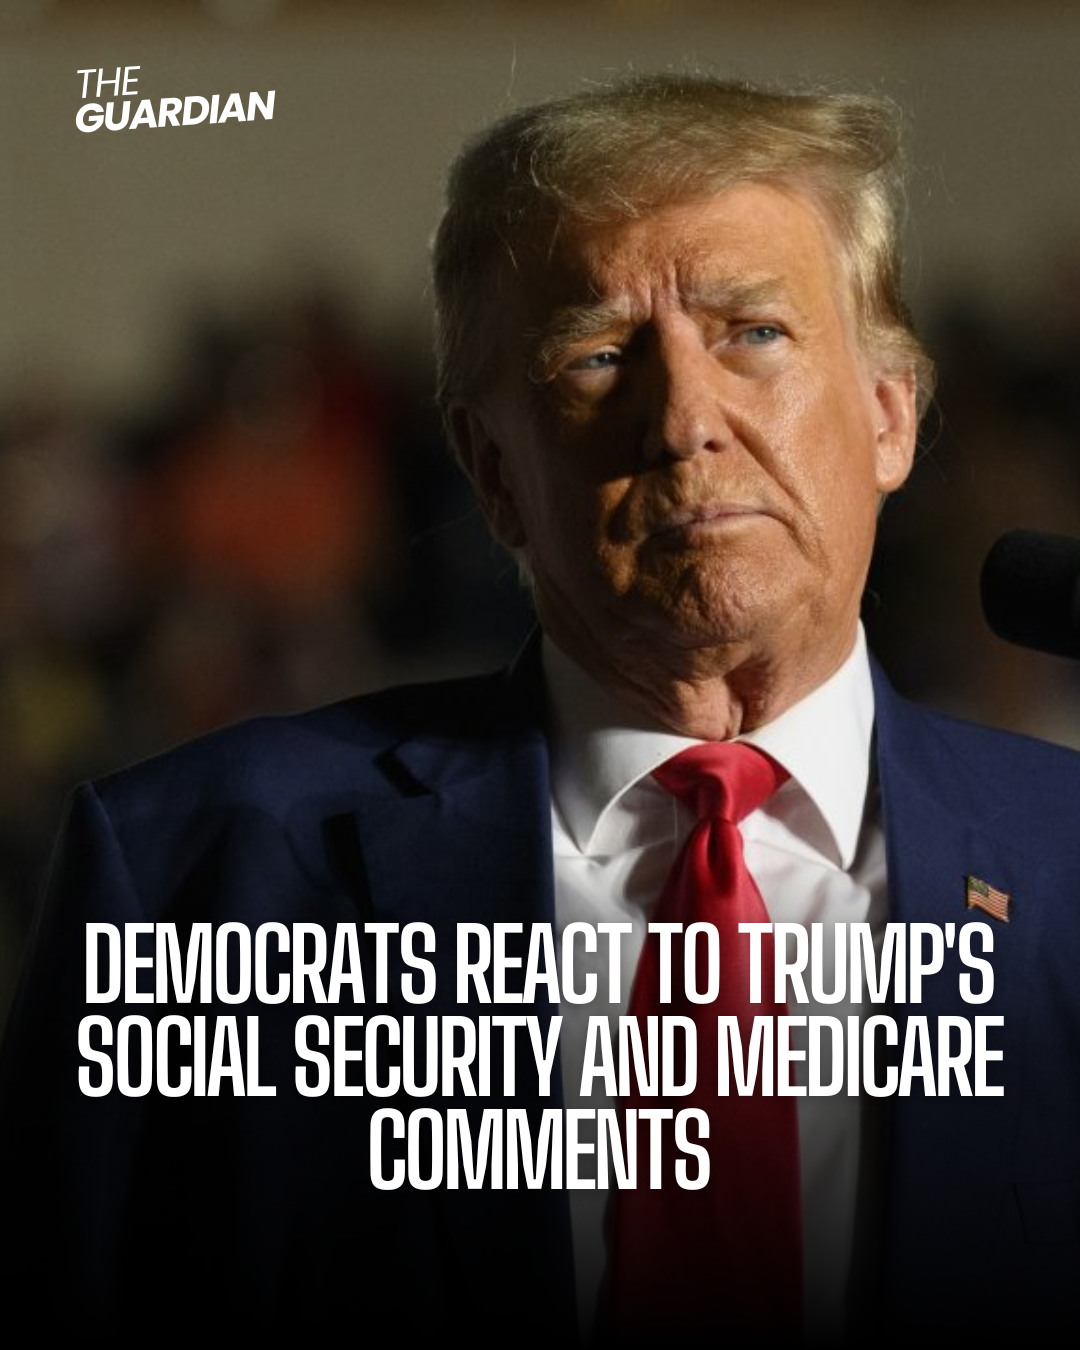 Democrats respond quickly to former President Trump's recent comments about prospective changes to Social Security and Medicare.